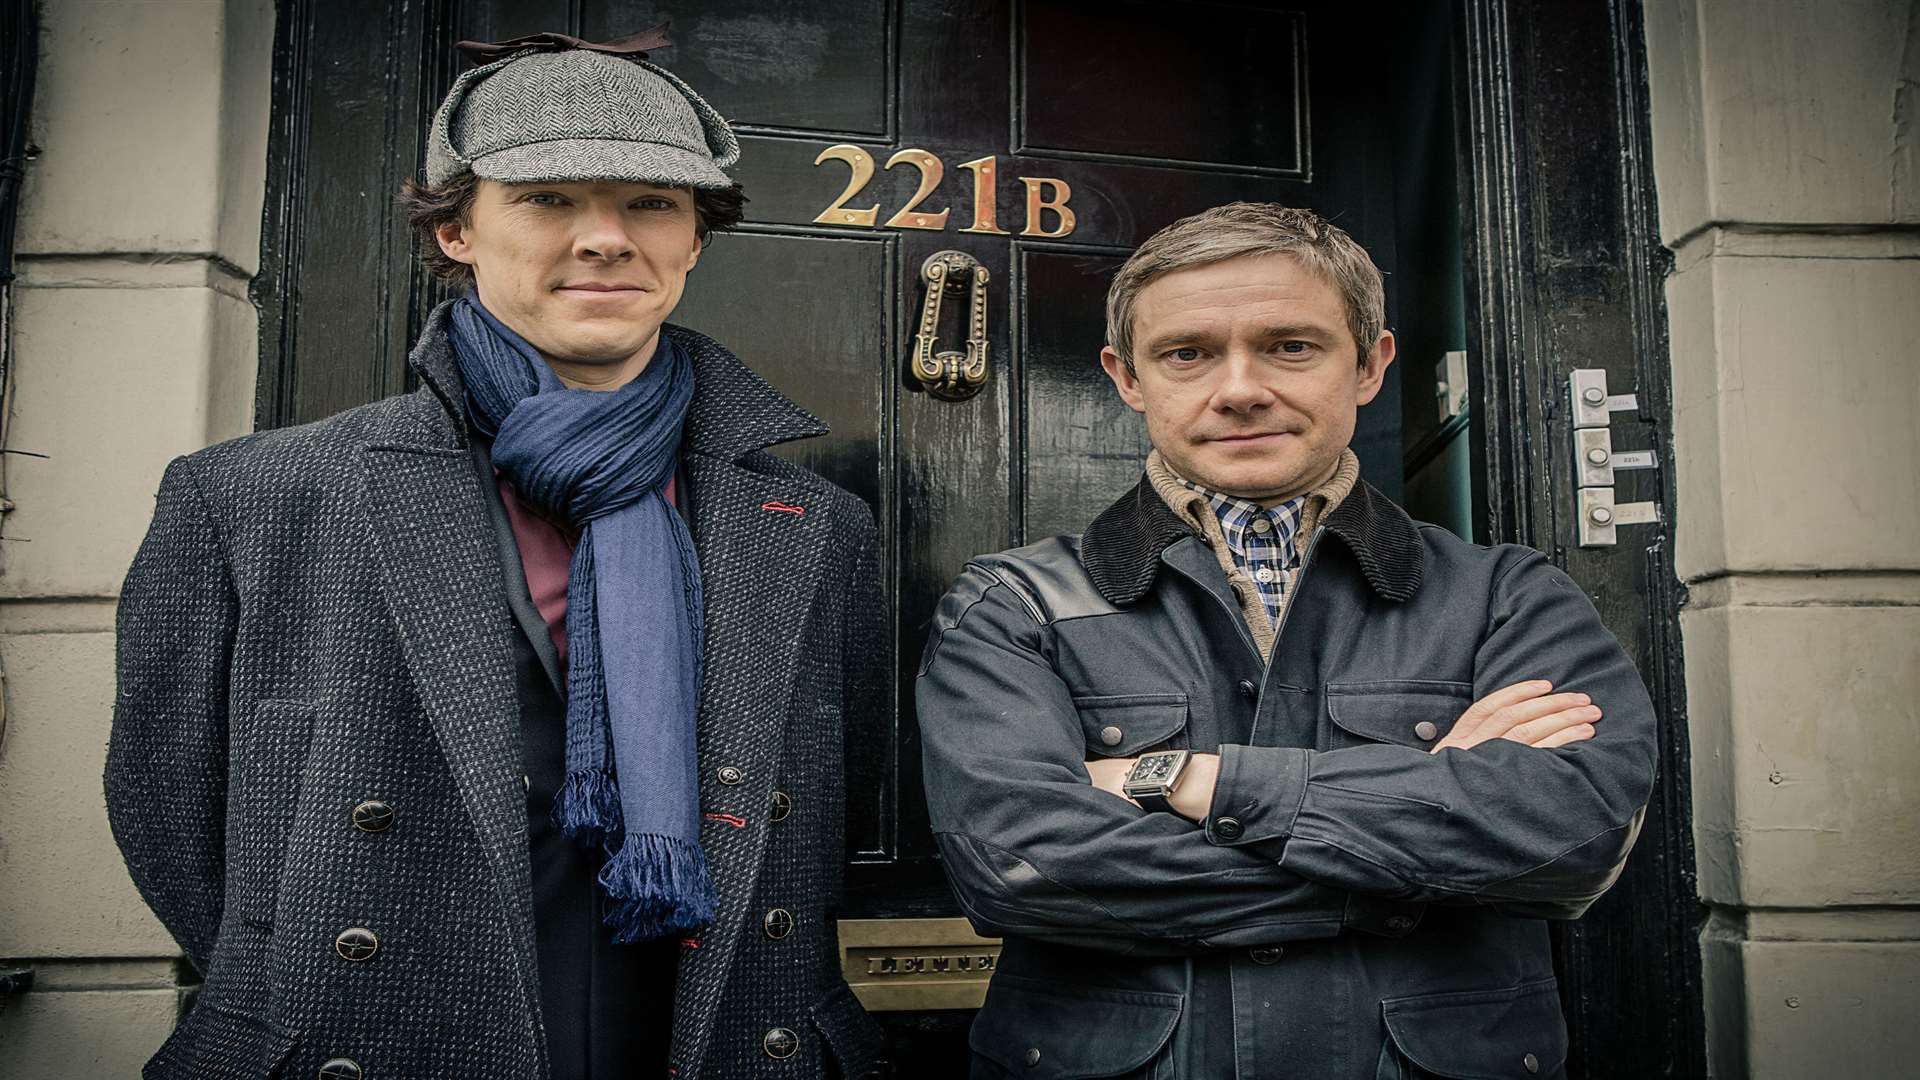 The allegation centred around a clip from television series Sherlock, starring Benedict Cumberbatch and Martin Freeman. Picture: Robert Viglasky/BBC/Hartswood Films